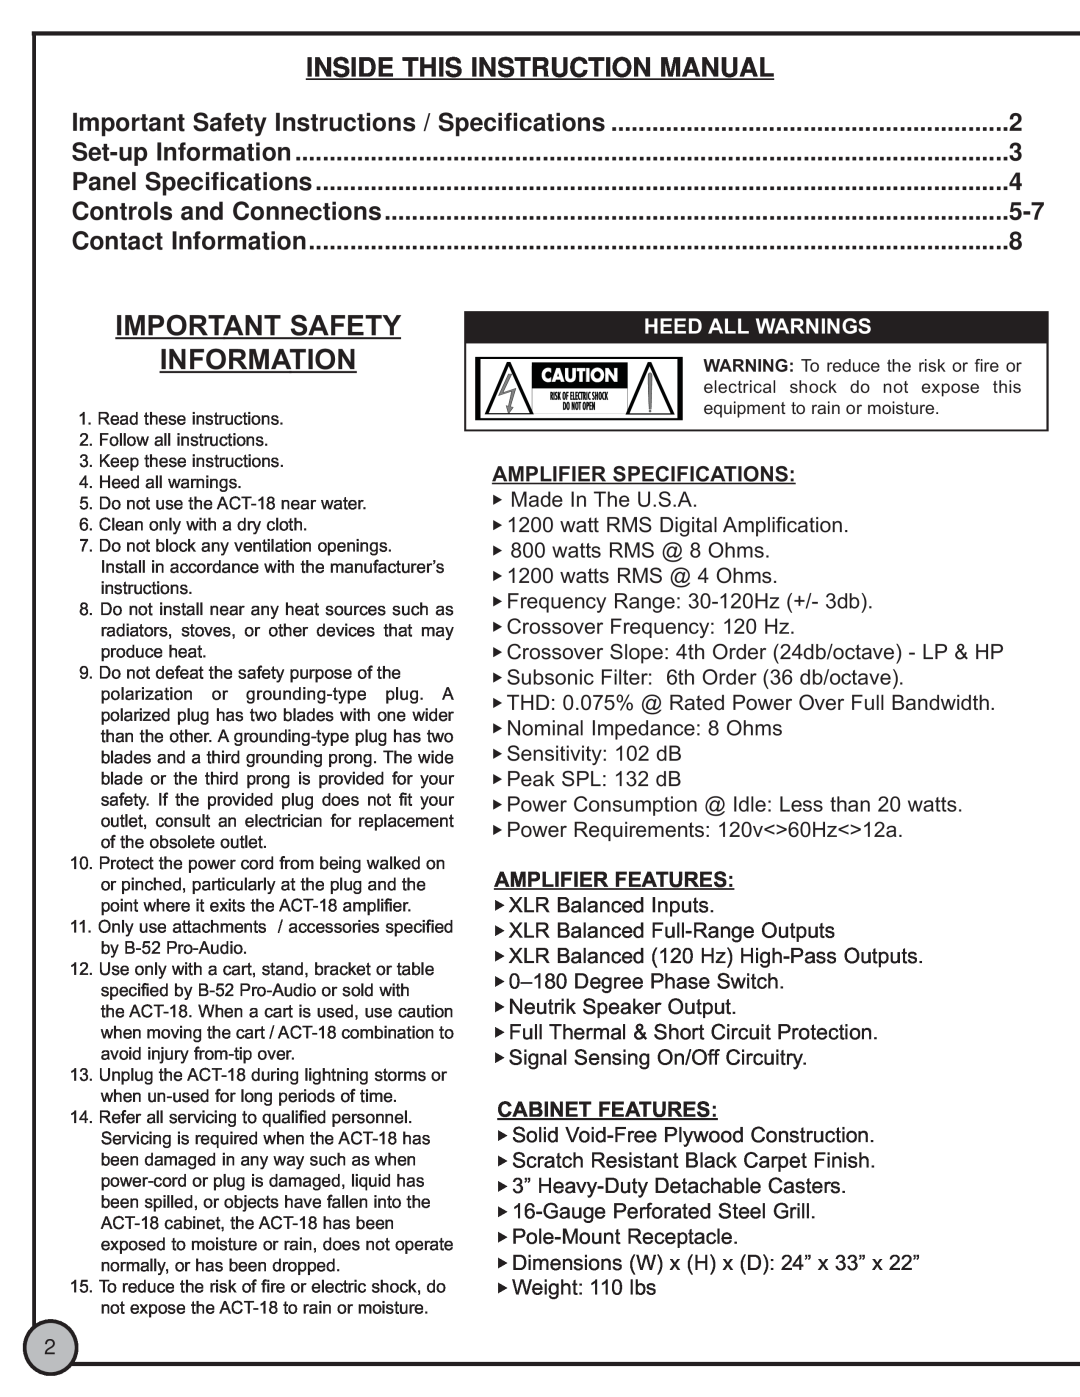 ETI Sound Systems, INC ACT18 Important Safety Information, Set-upInformation, Panel Specifications, Contact Information 